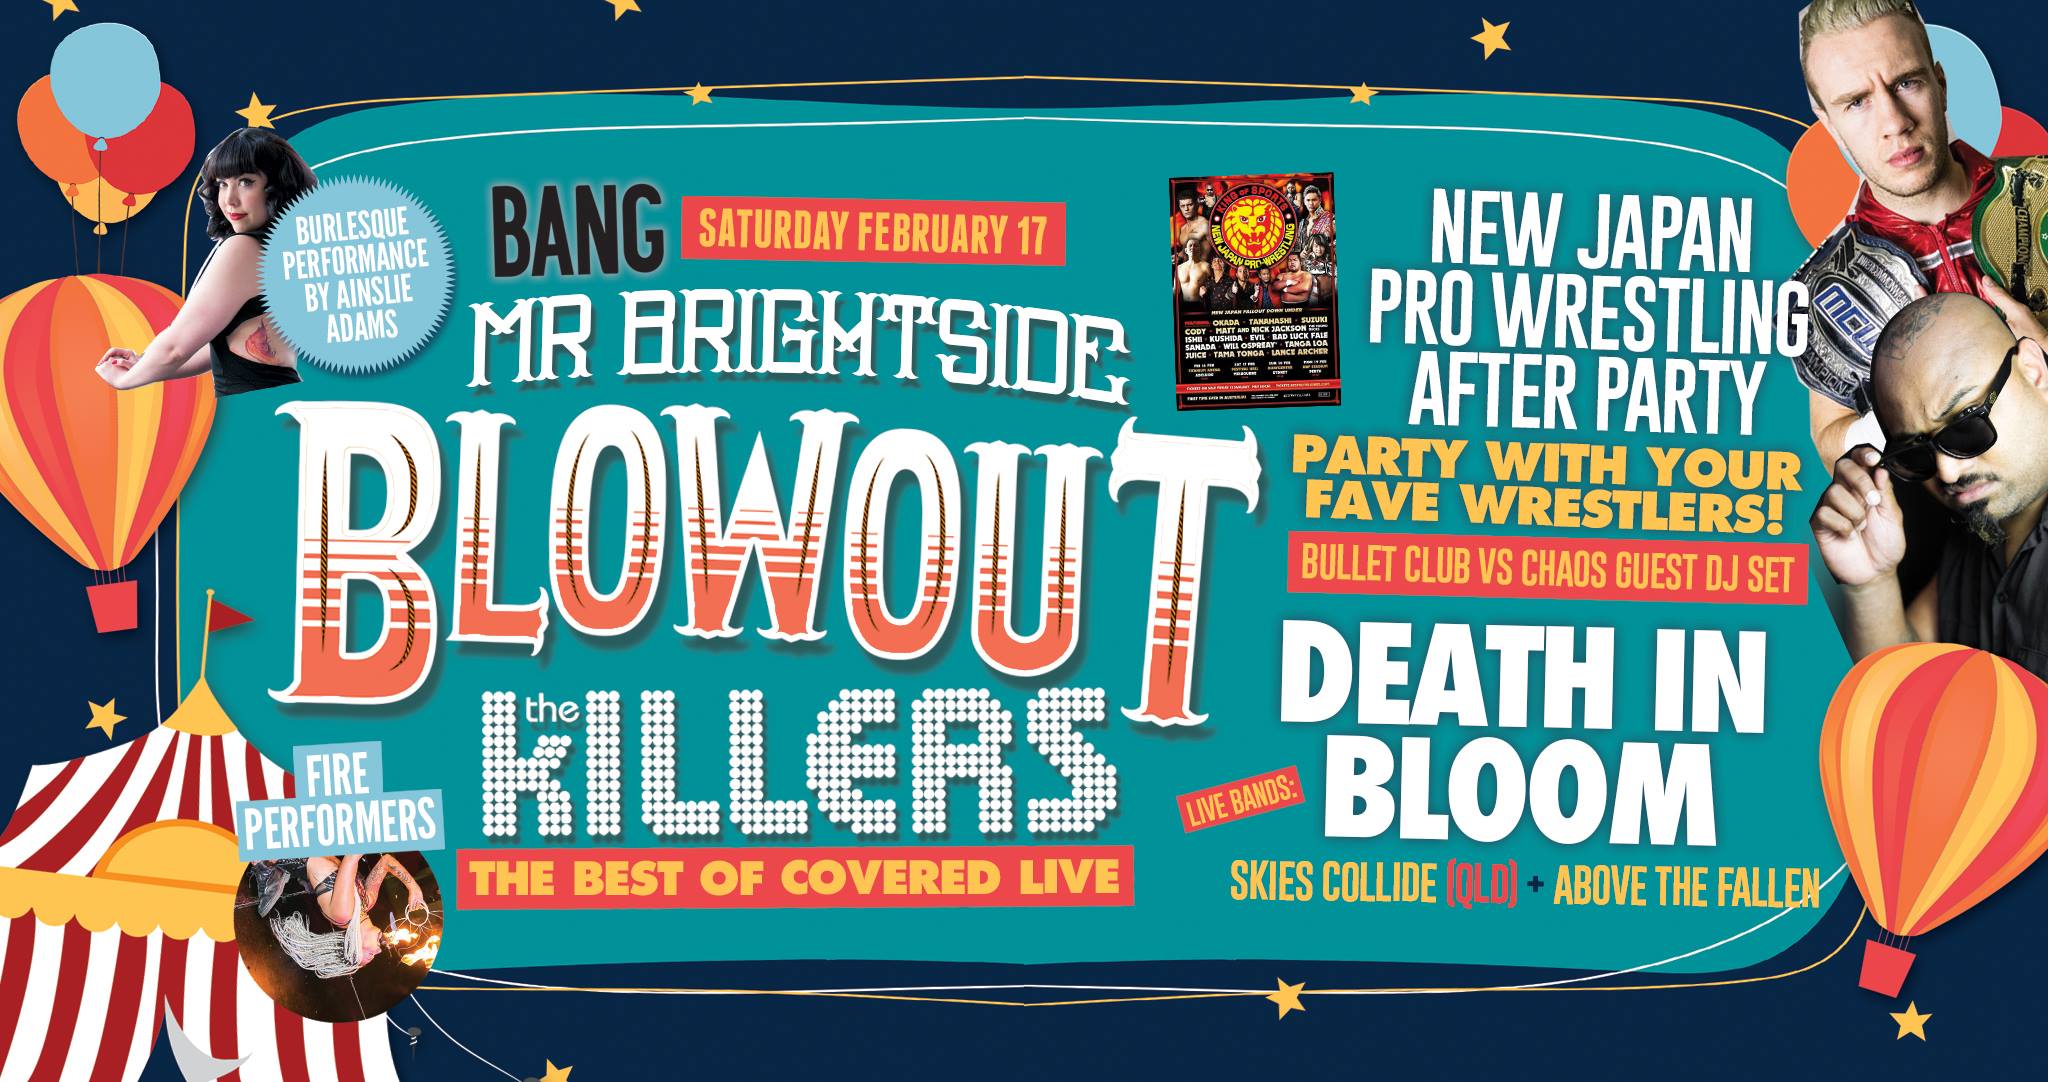 Press flyer image BANG PRESENTS - MR BRIGHTSIDE BLOWOUT NJPW AFTERPARTY - SATURDAY 17 FEBRUARY, 2018